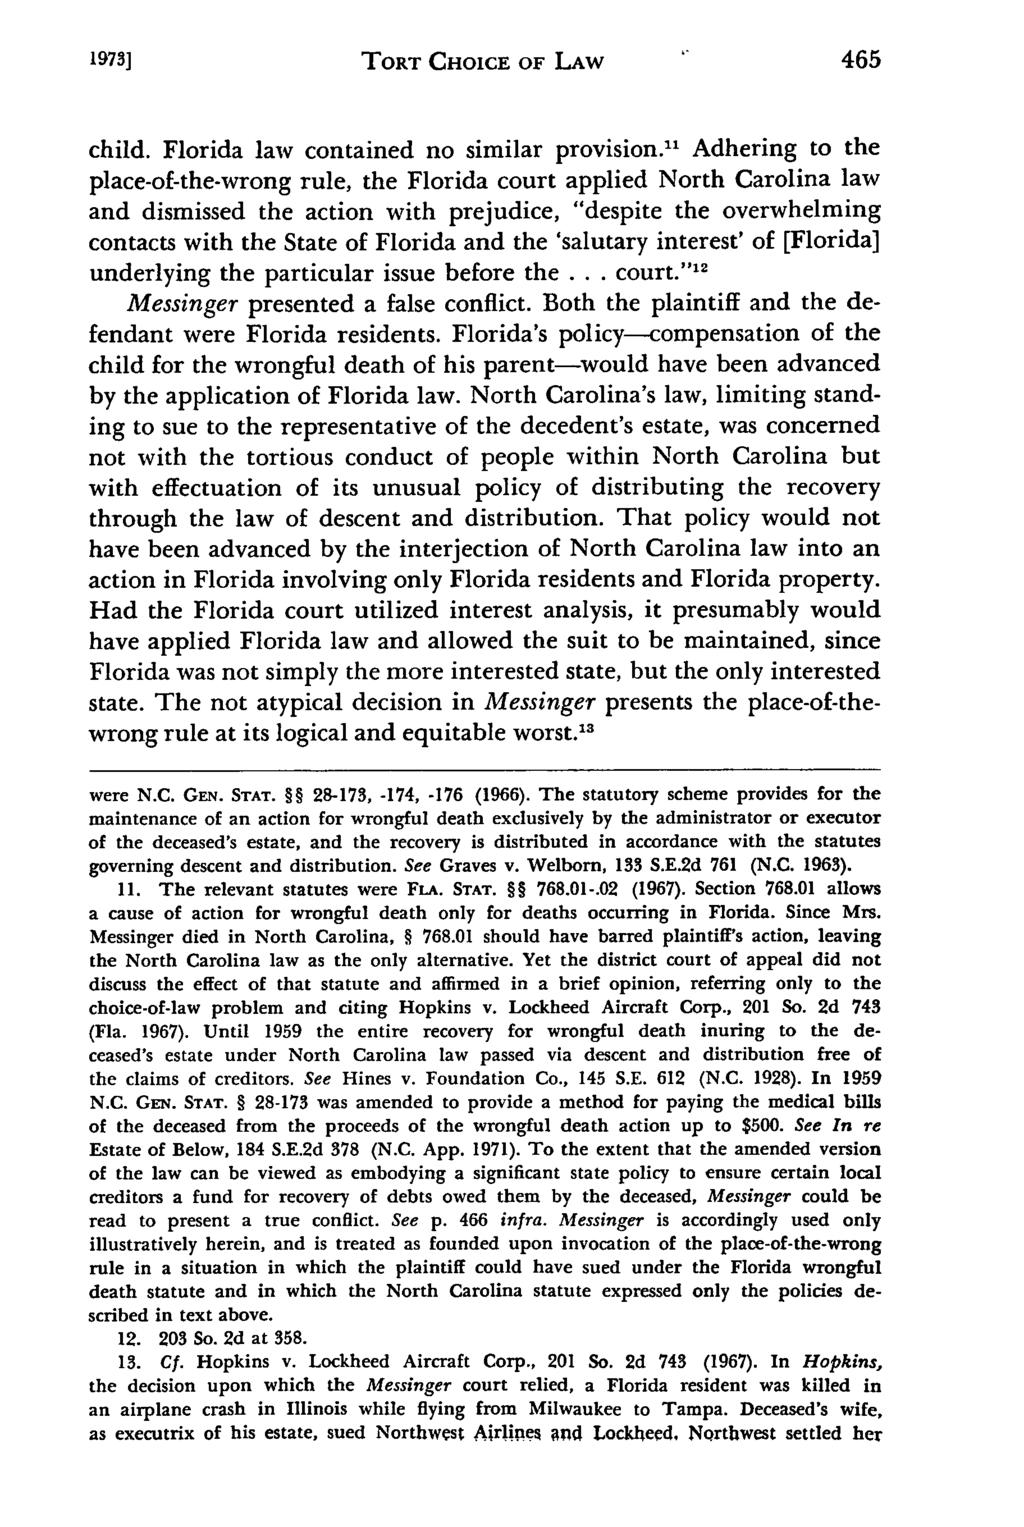 1973) TORT CHOICE OF LAW child. Florida law contained no similar provision.